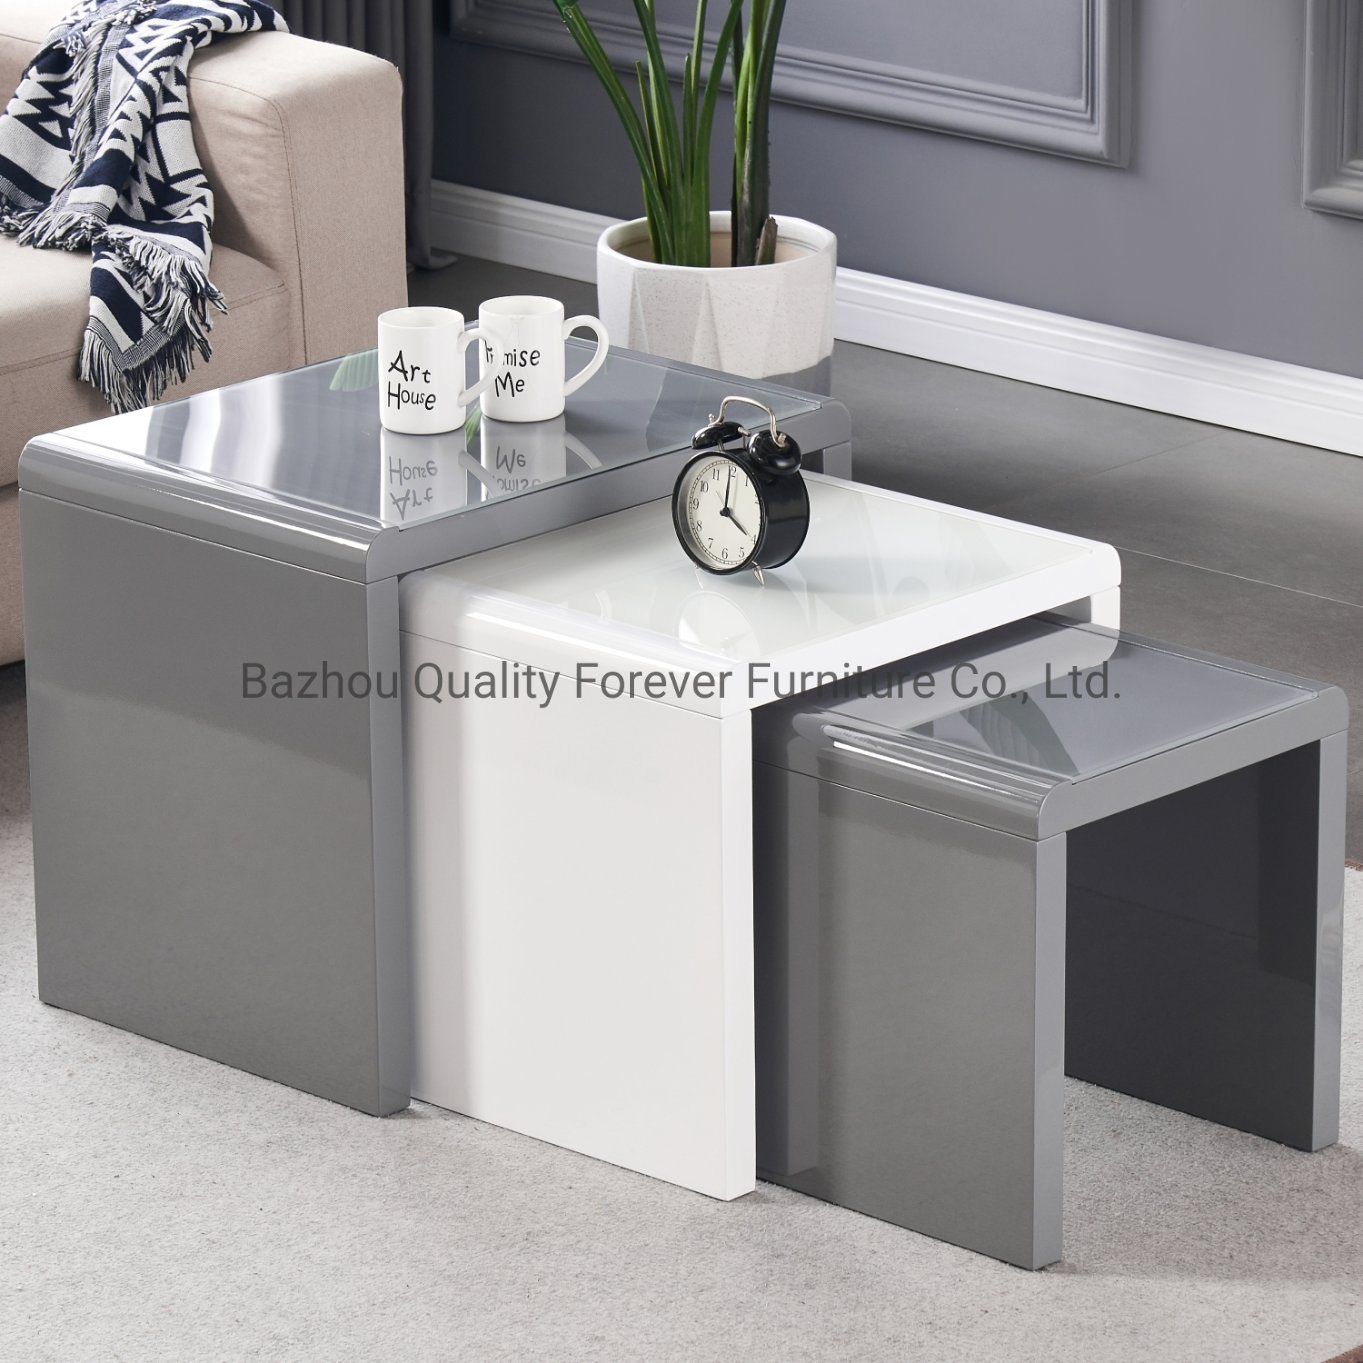 3 Nesting Mdf With Grey And White High Gloss Coffee Tables For Living Room  Furniture – China Mdf Coffee Table, Nesting Coffee Table | Made In China Within Coffee Tables Of 3 Nesting Tables (View 9 of 15)